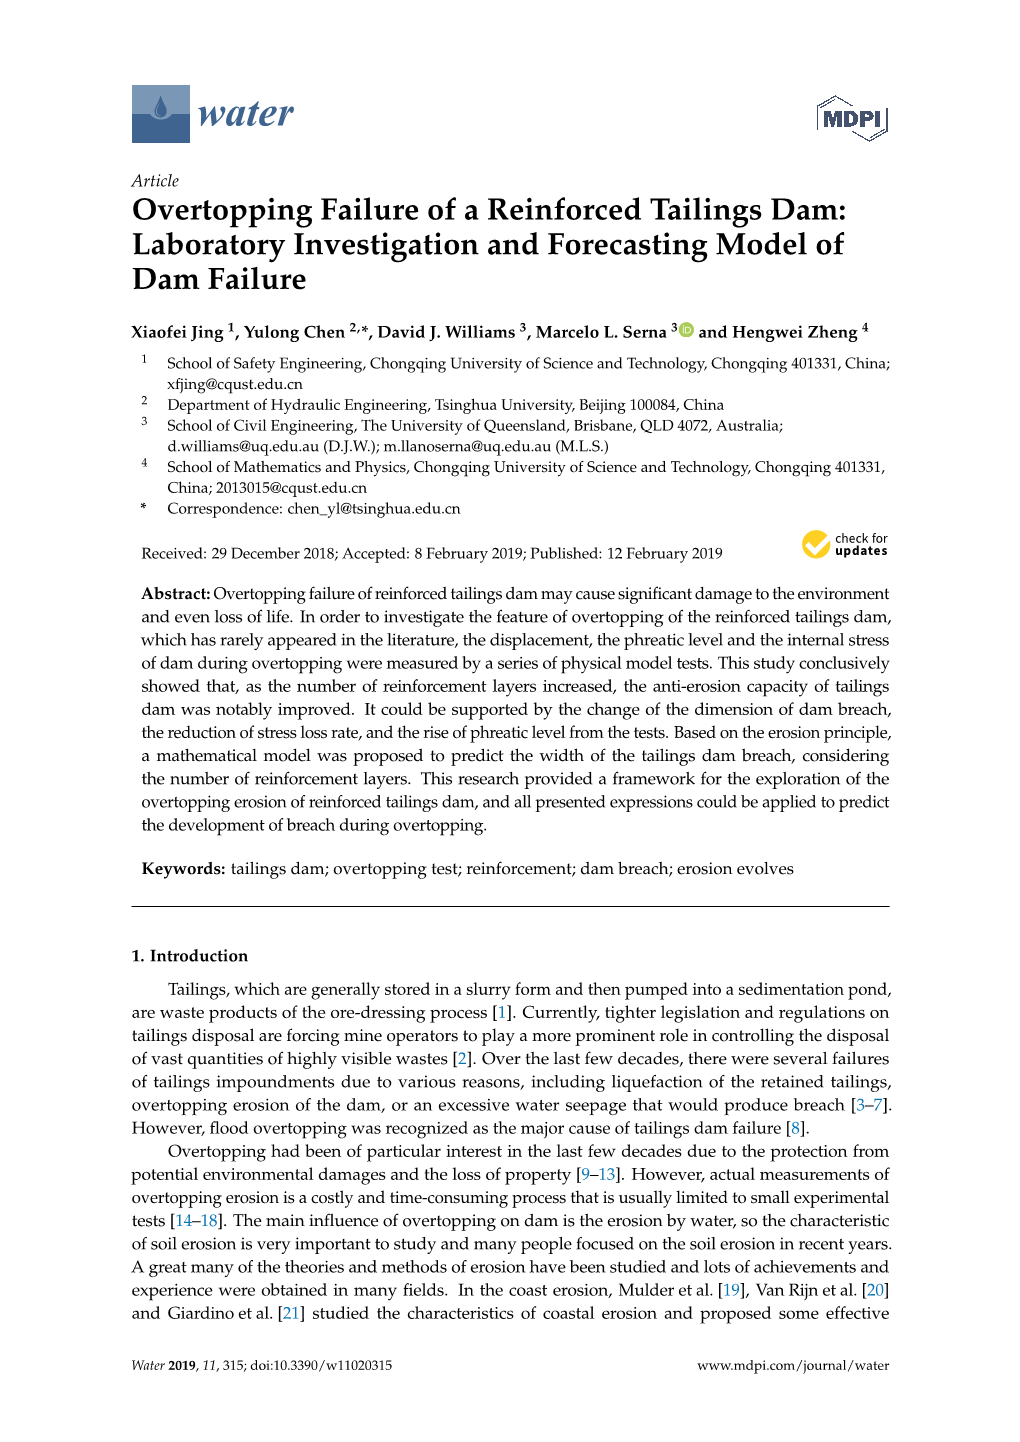 Overtopping Failure of a Reinforced Tailings Dam: Laboratory Investigation and Forecasting Model of Dam Failure